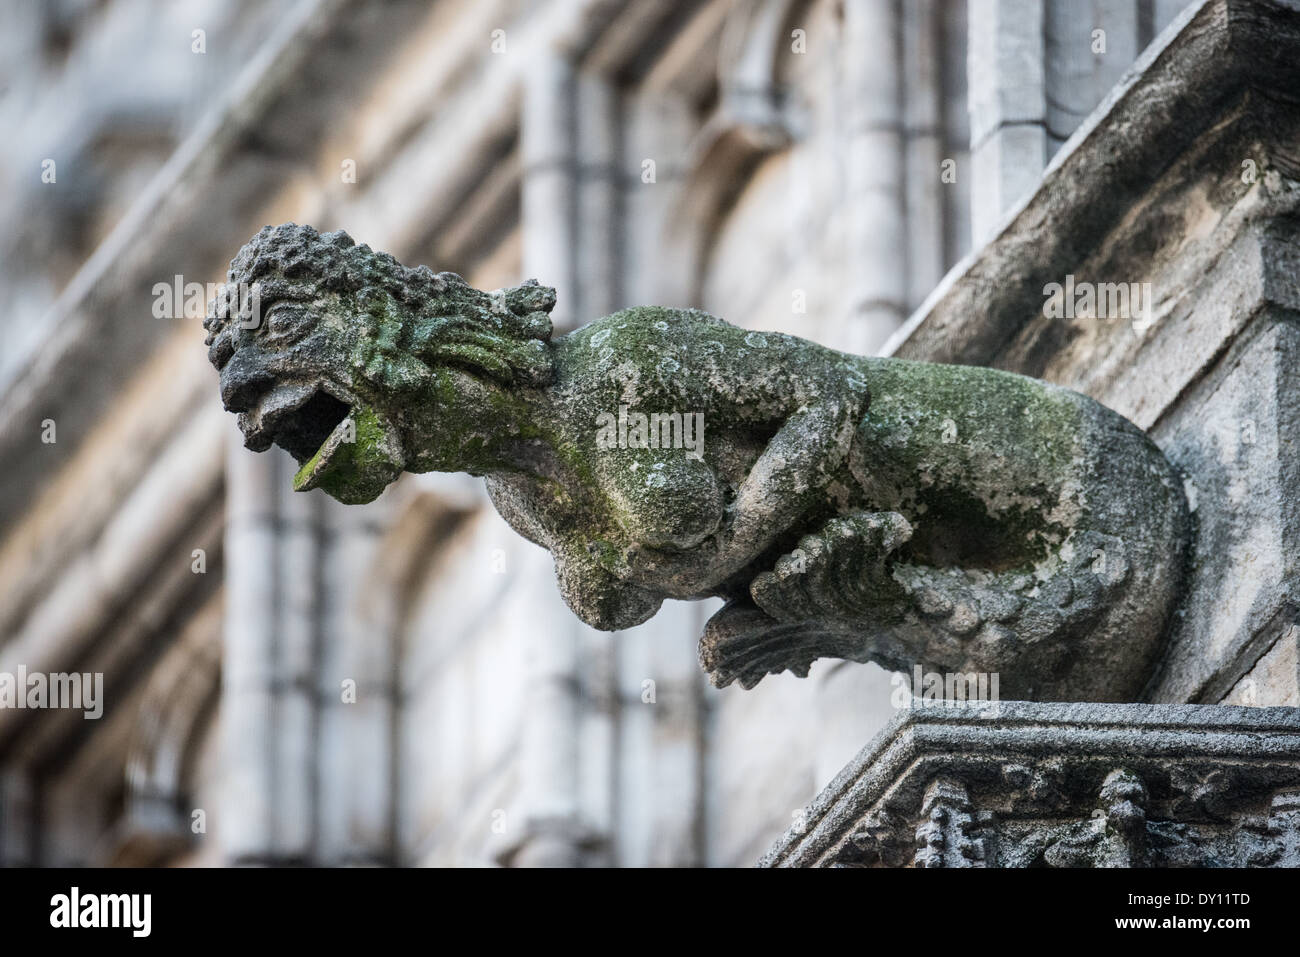 A stong gargoyle on the exterior of the Brussels Town Hall (Hotel de Ville) on Grand Place (La Grand-Place), a UNESCO World Heritage Site in central Brussels, Belgium. Lined with ornate, historic buildings, the cobblestone square is the primary tourist attraction in Brussels. Stock Photo